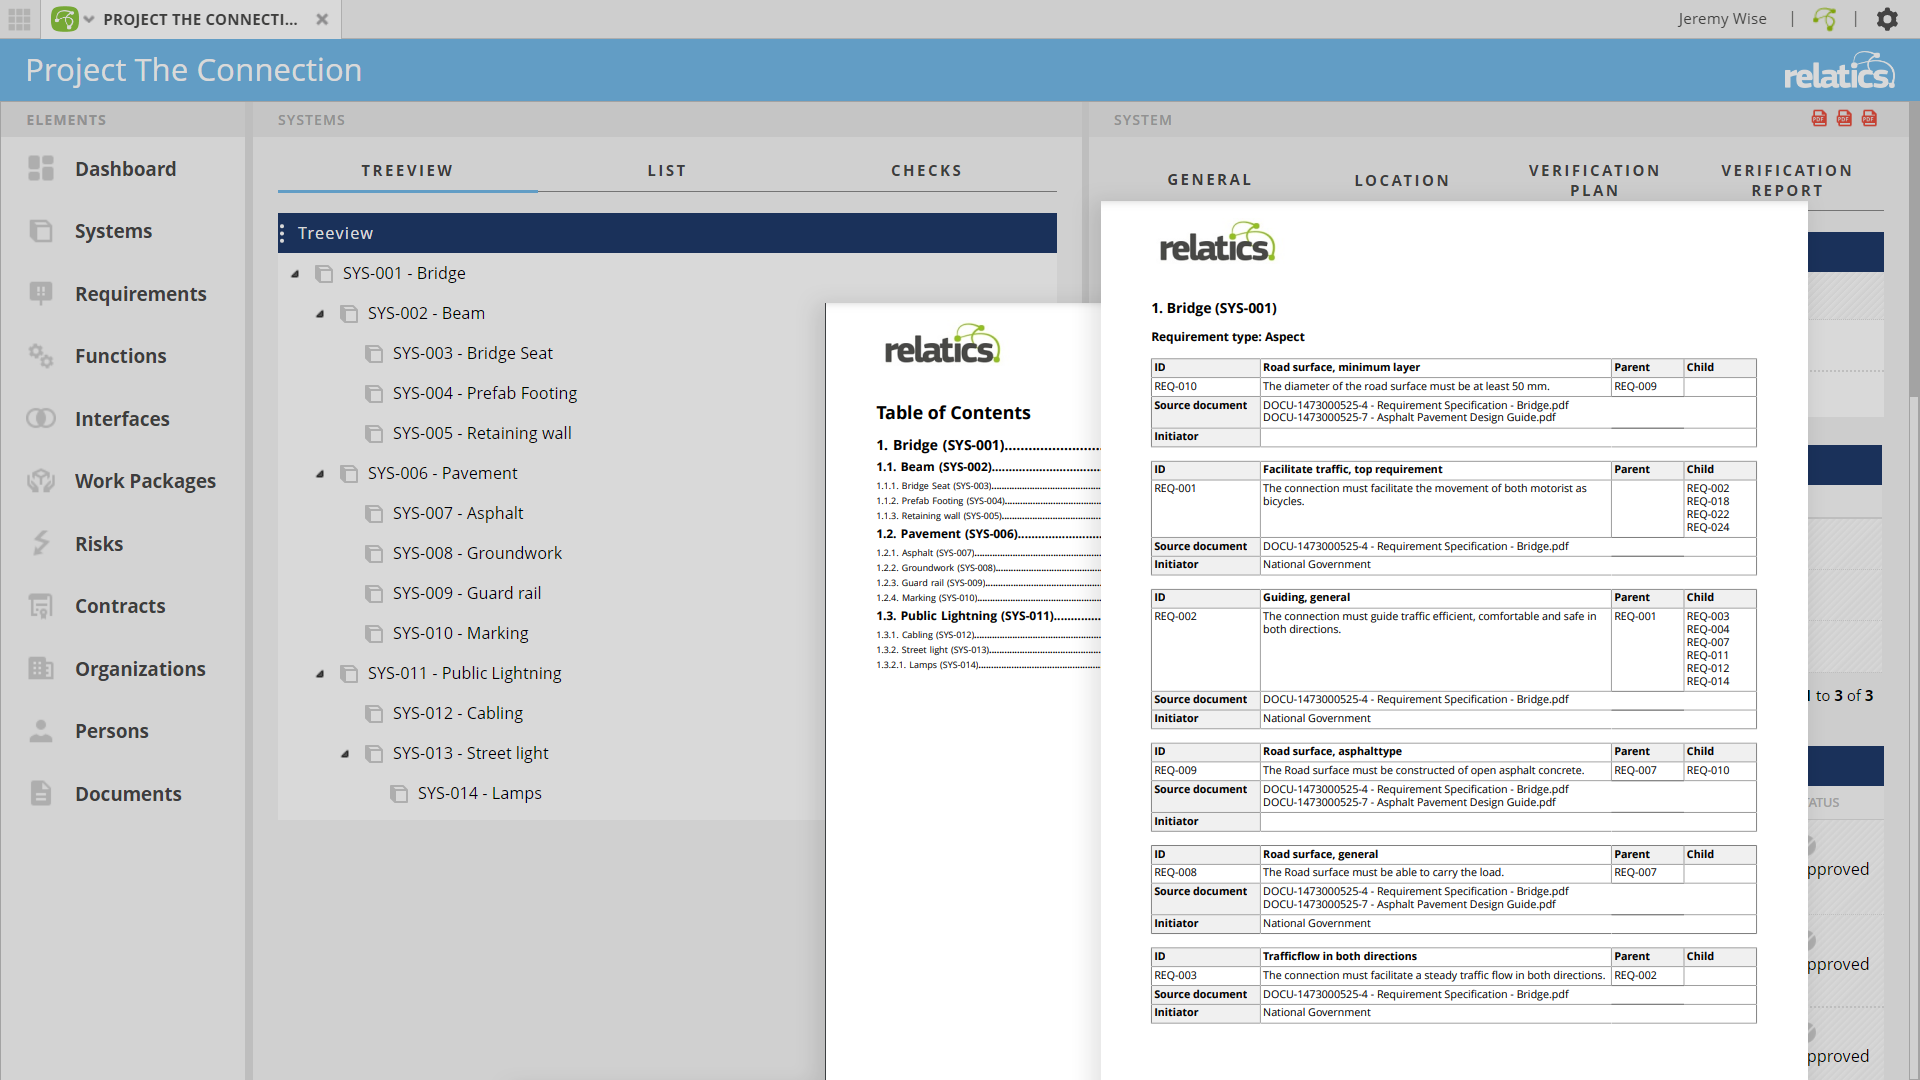 Automatic generation of custom-styled reports based on live data. Often used for requirements specifications, verifications reports and risk matrices.